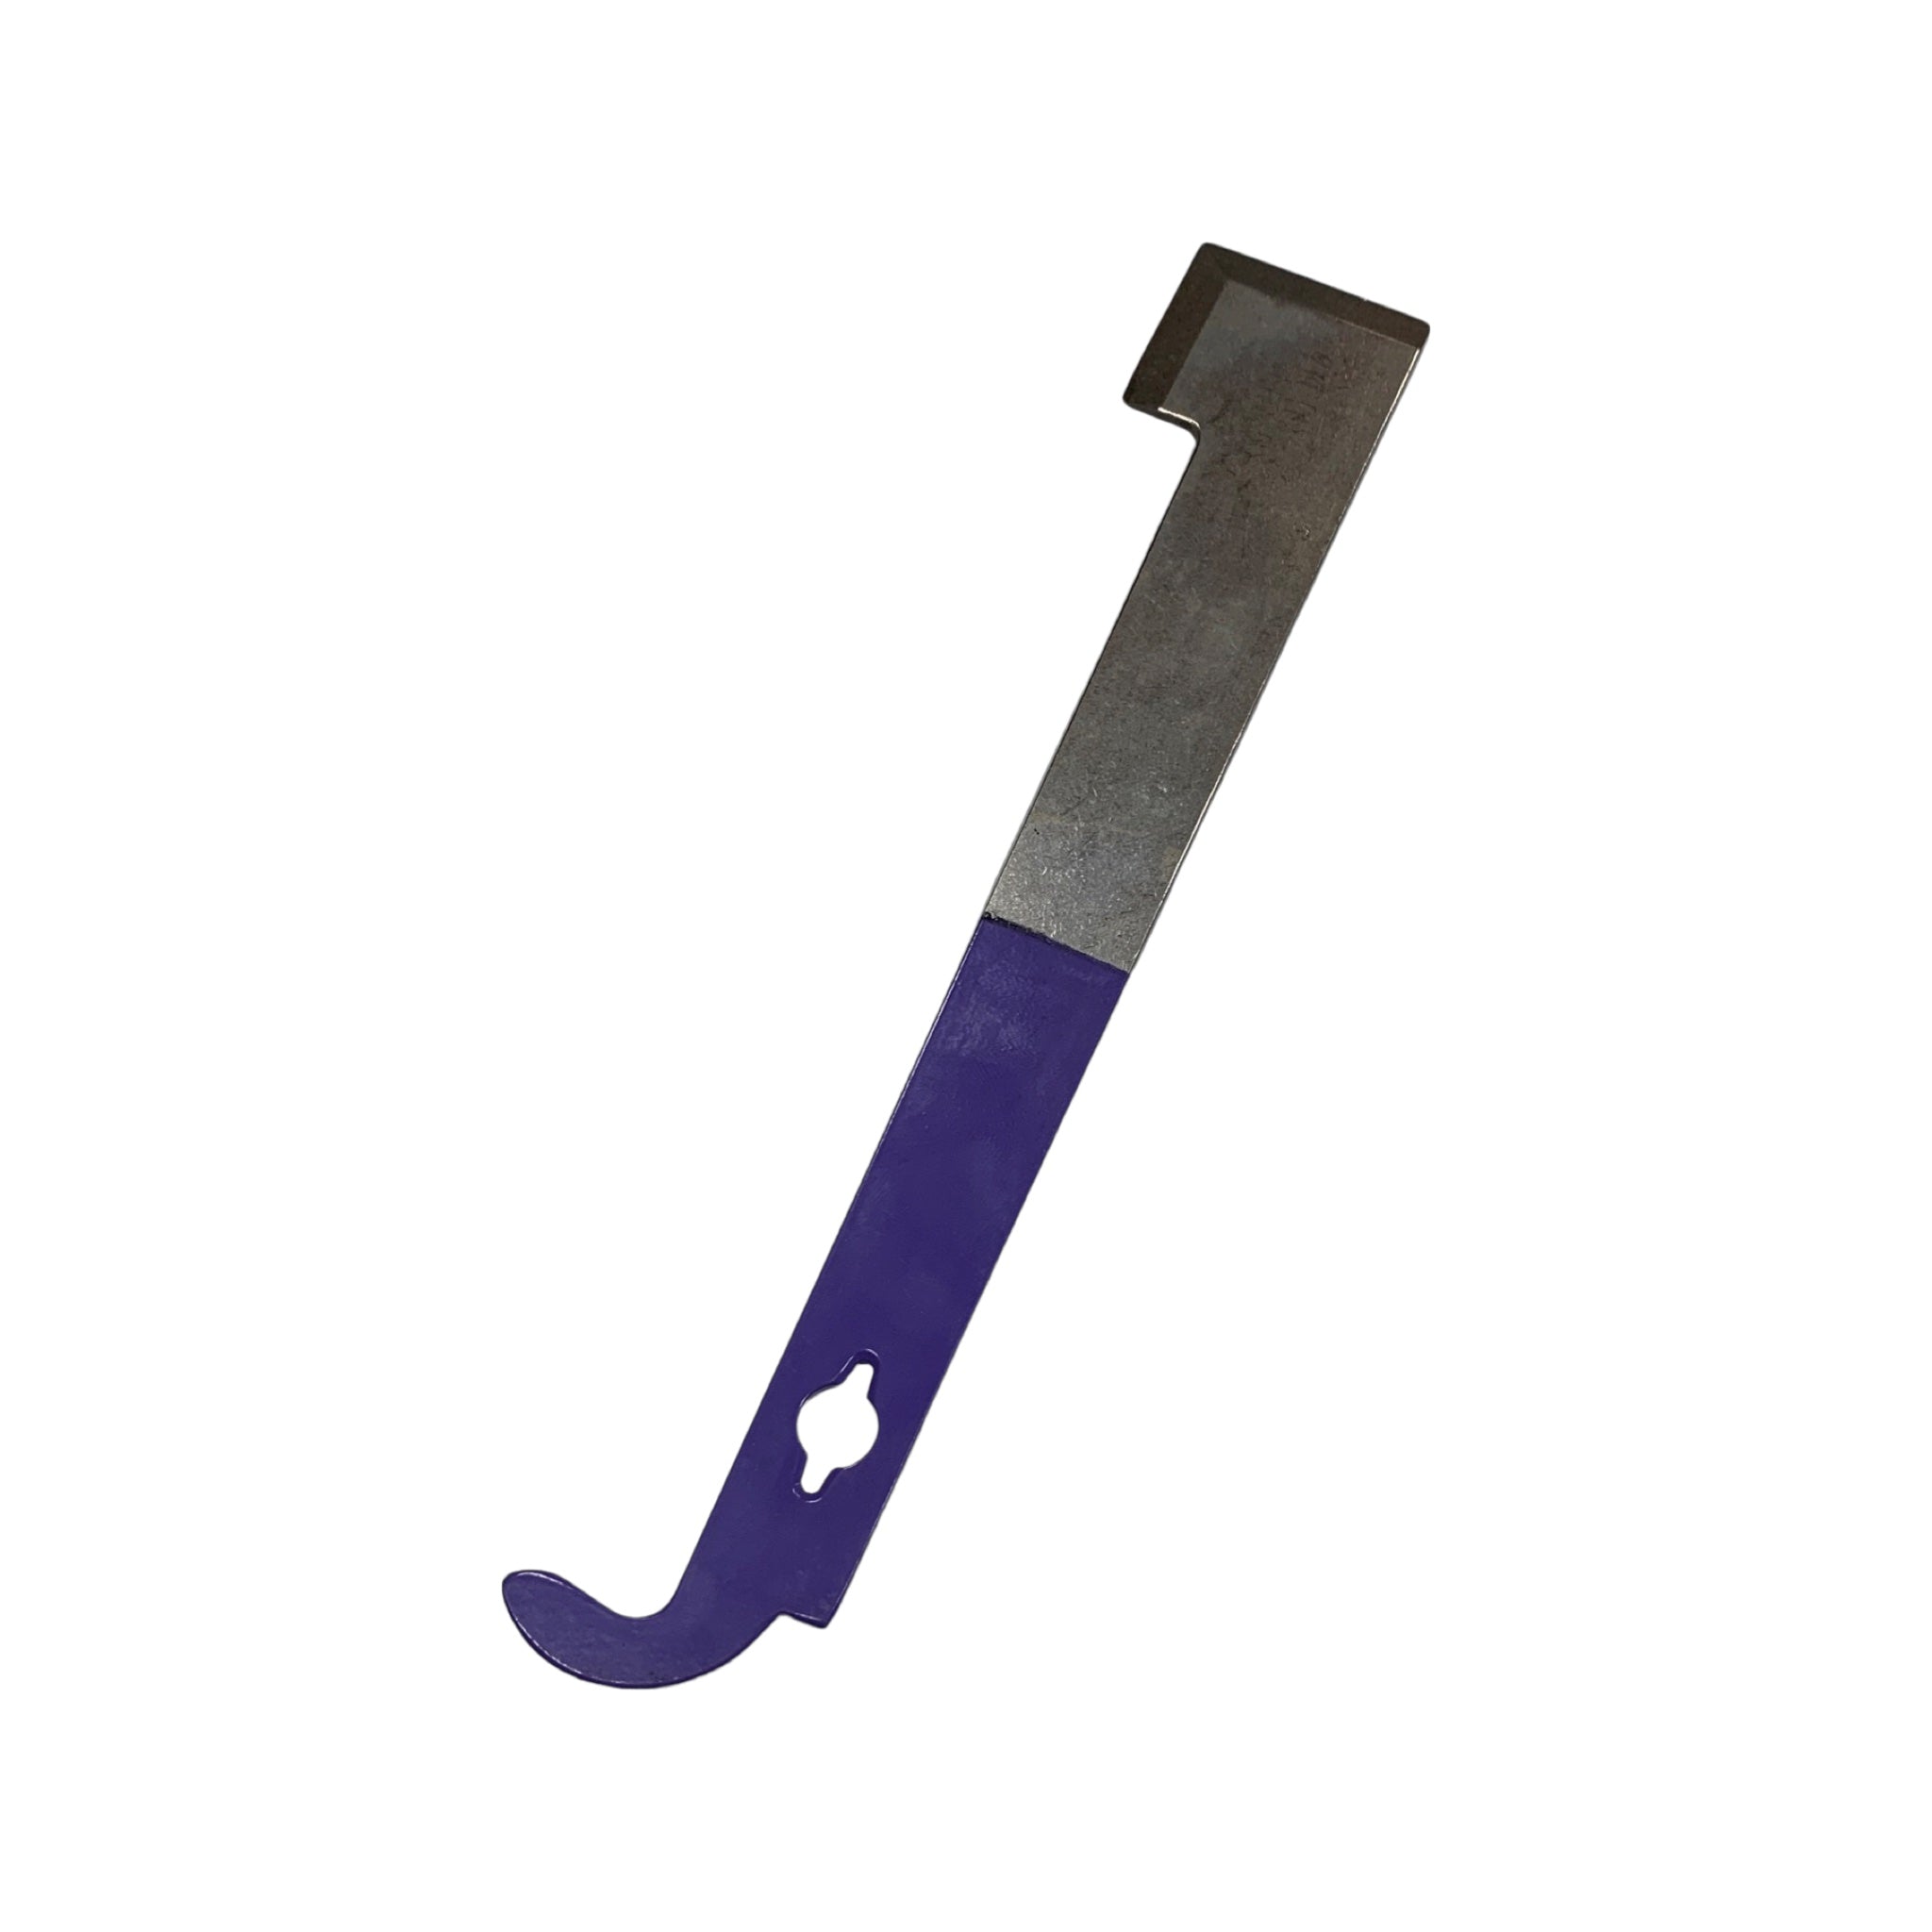 Hive Tool with Rounded Corners